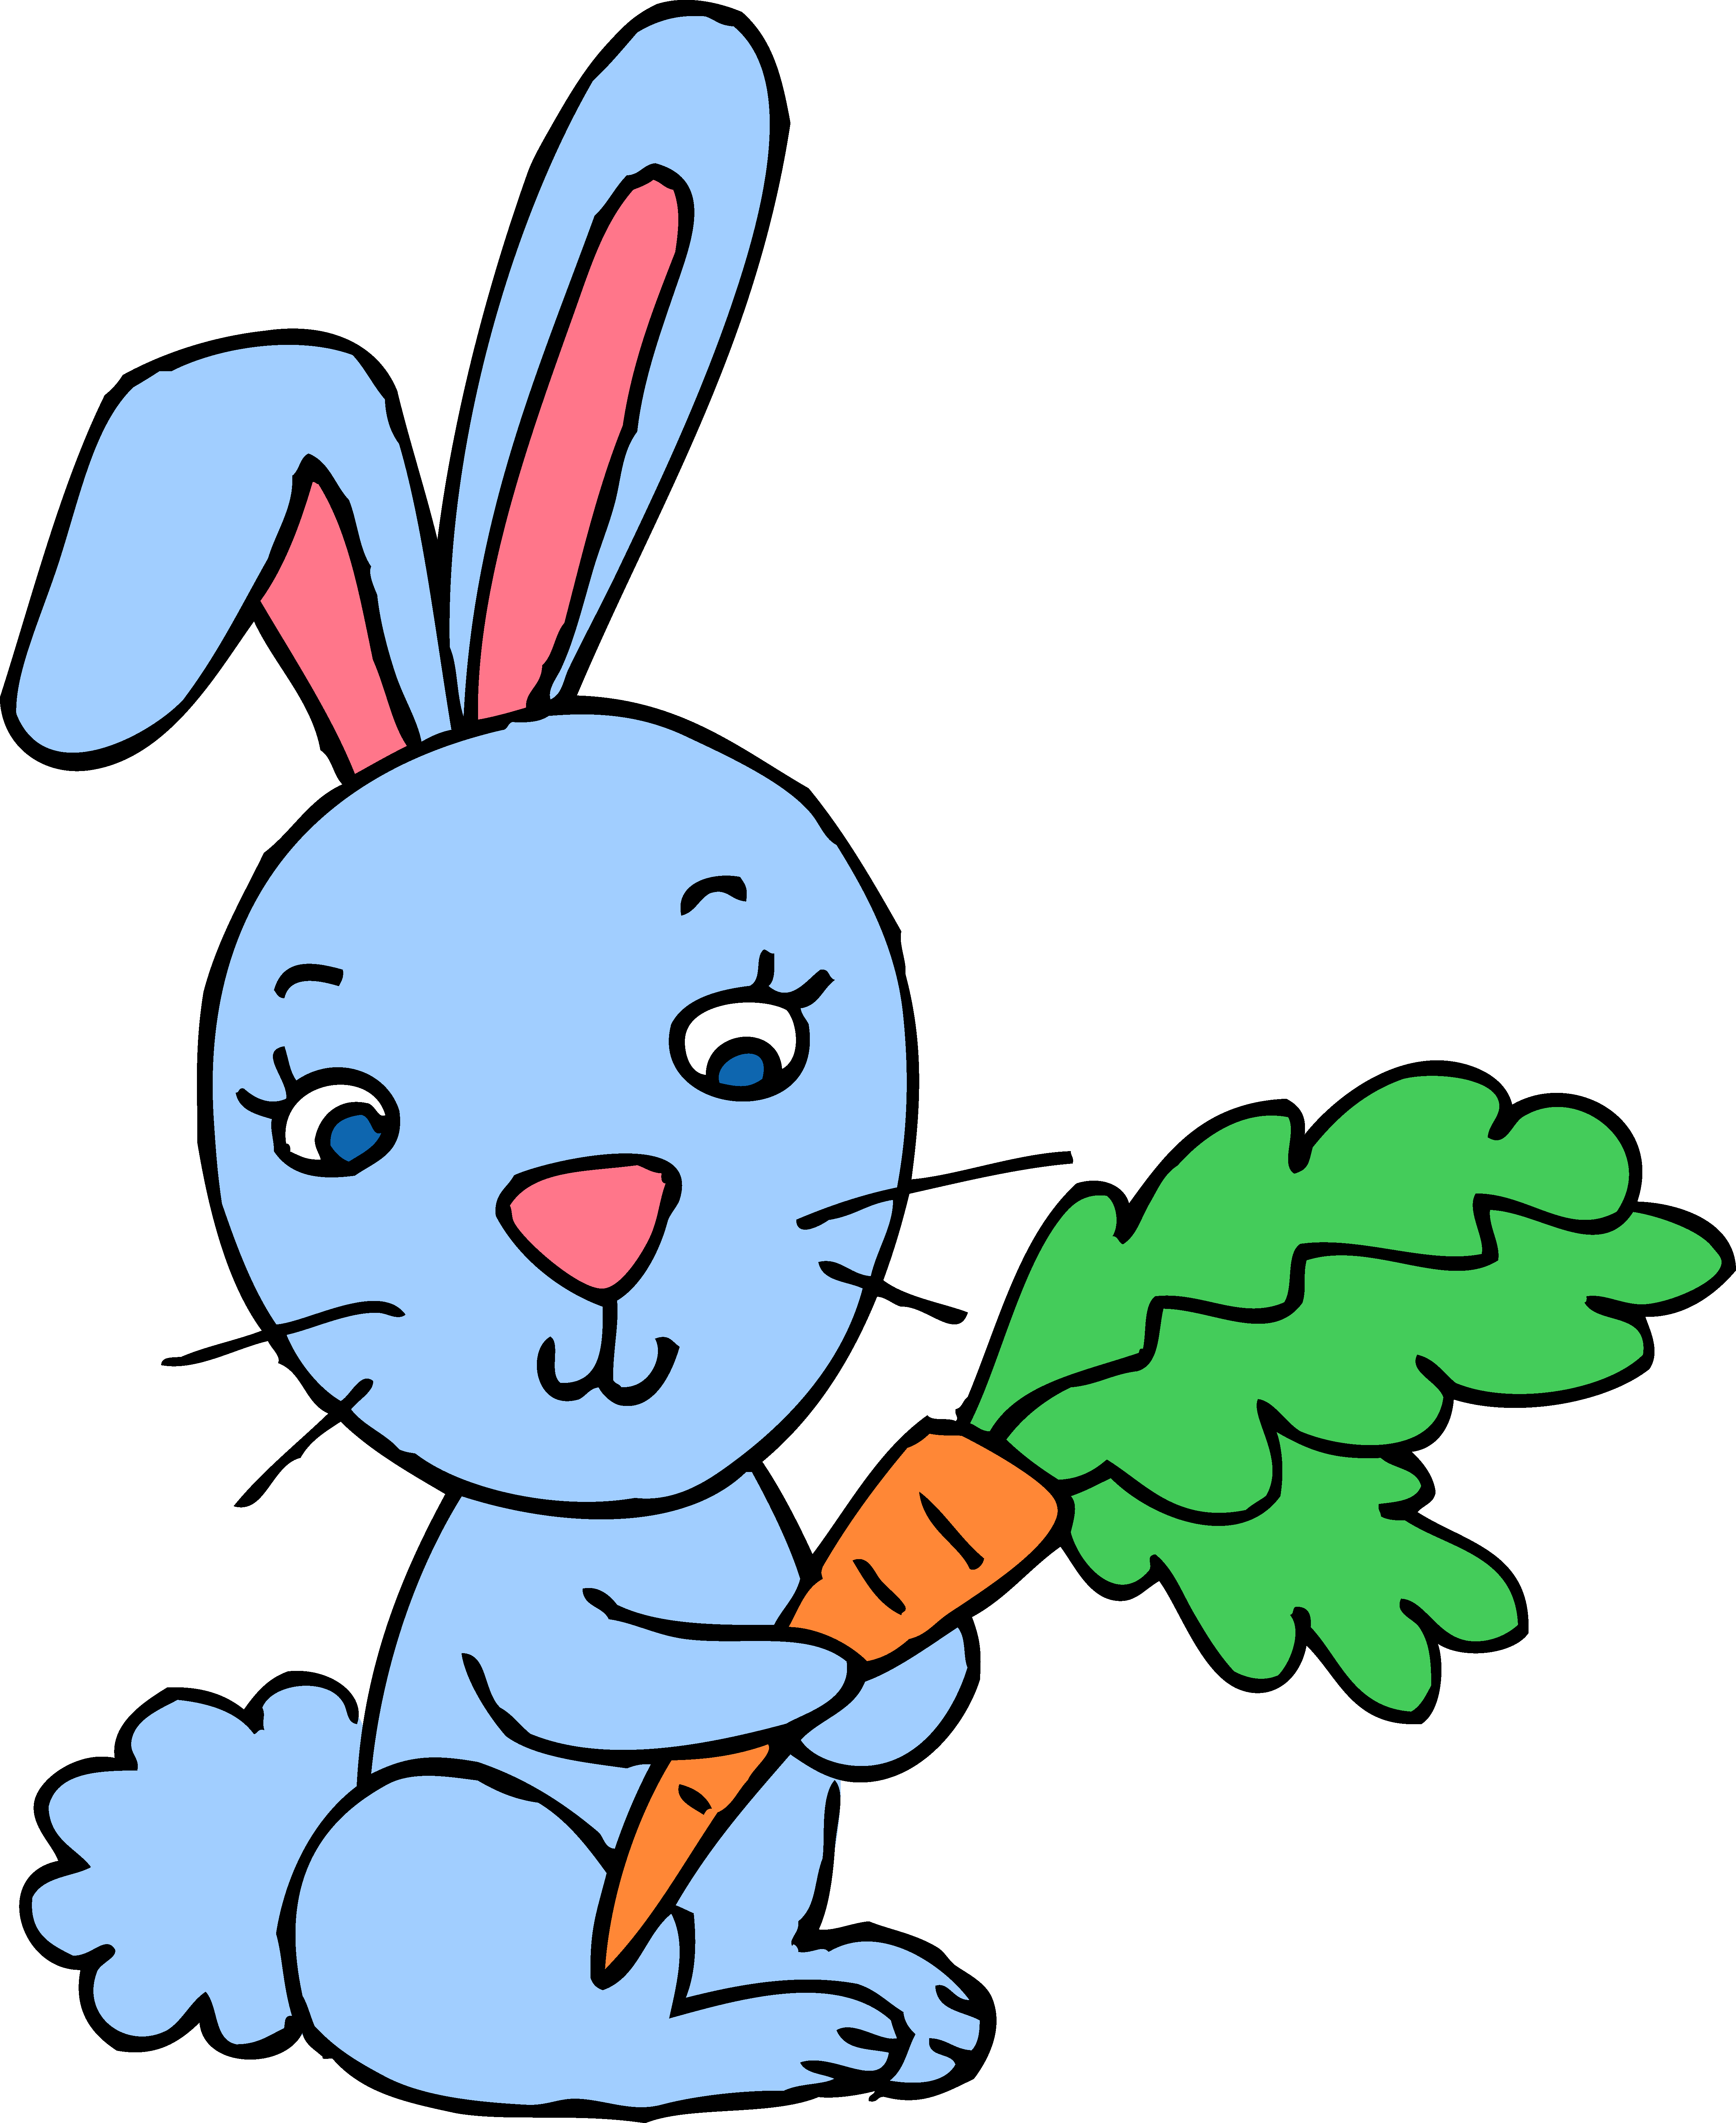 Easter at getdrawings com. Mom clipart bunny